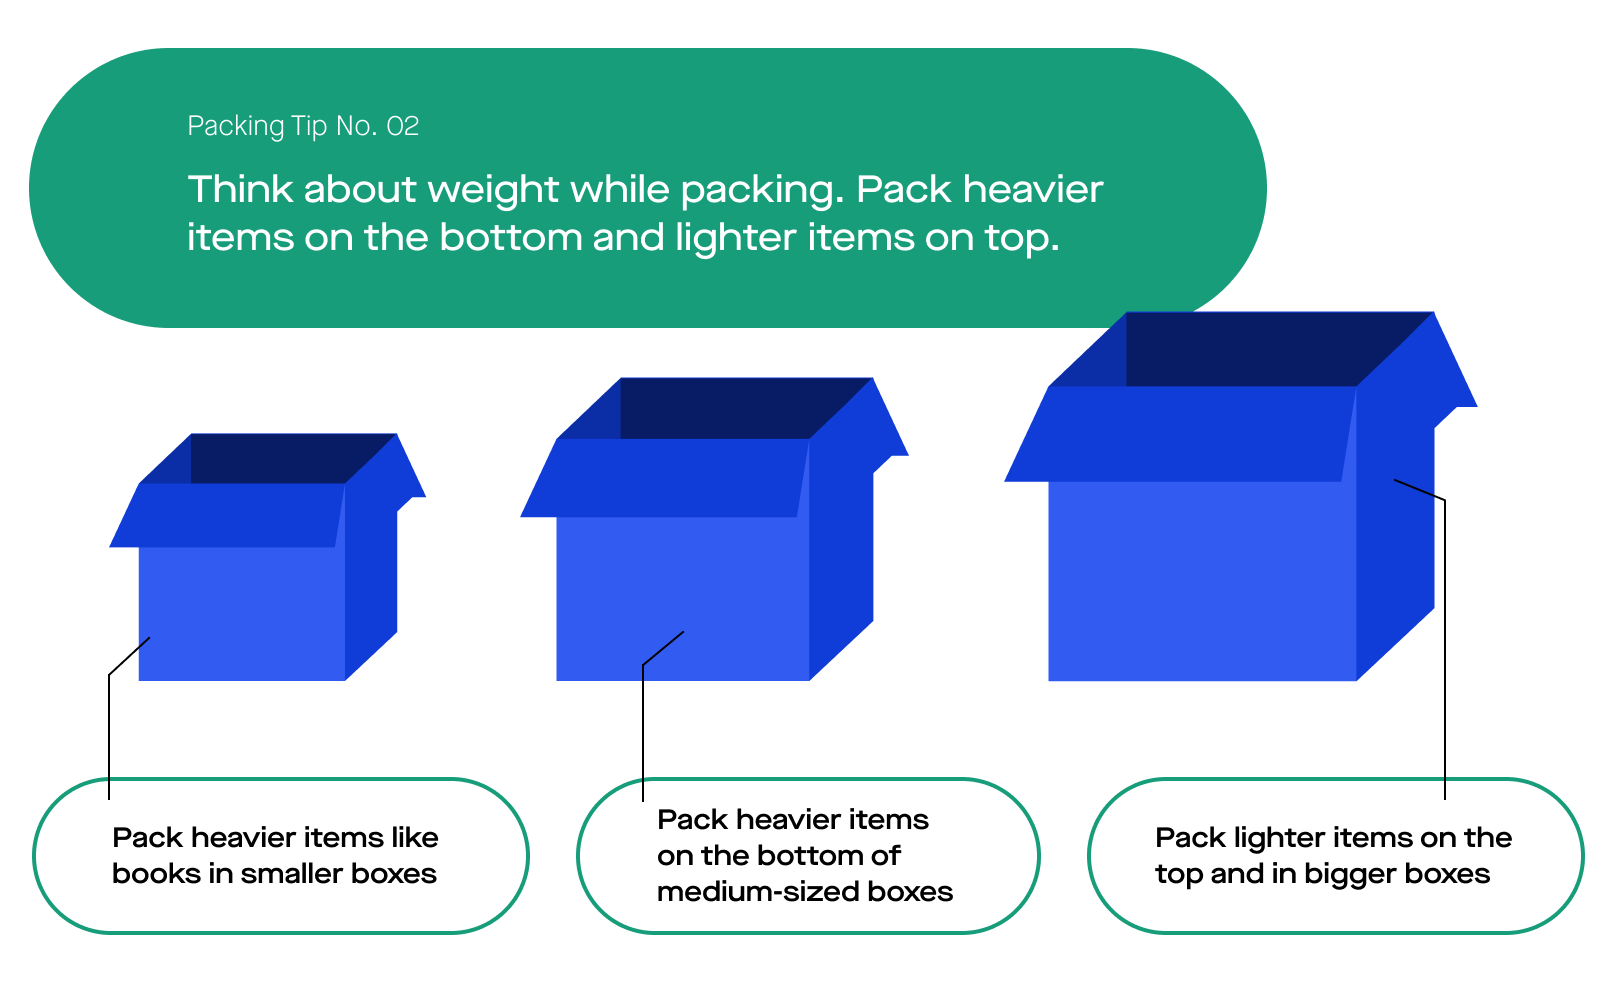 Image Packing tip No. 02 "Think about weight while packing. Pack heavier items on the bottom and lighter items on top." "Pack heavier items like books in smaller boxes." "Pack heavier items on the bottom of medium-sized boxes." "Pack lighter items on the top and in bigger boxes."